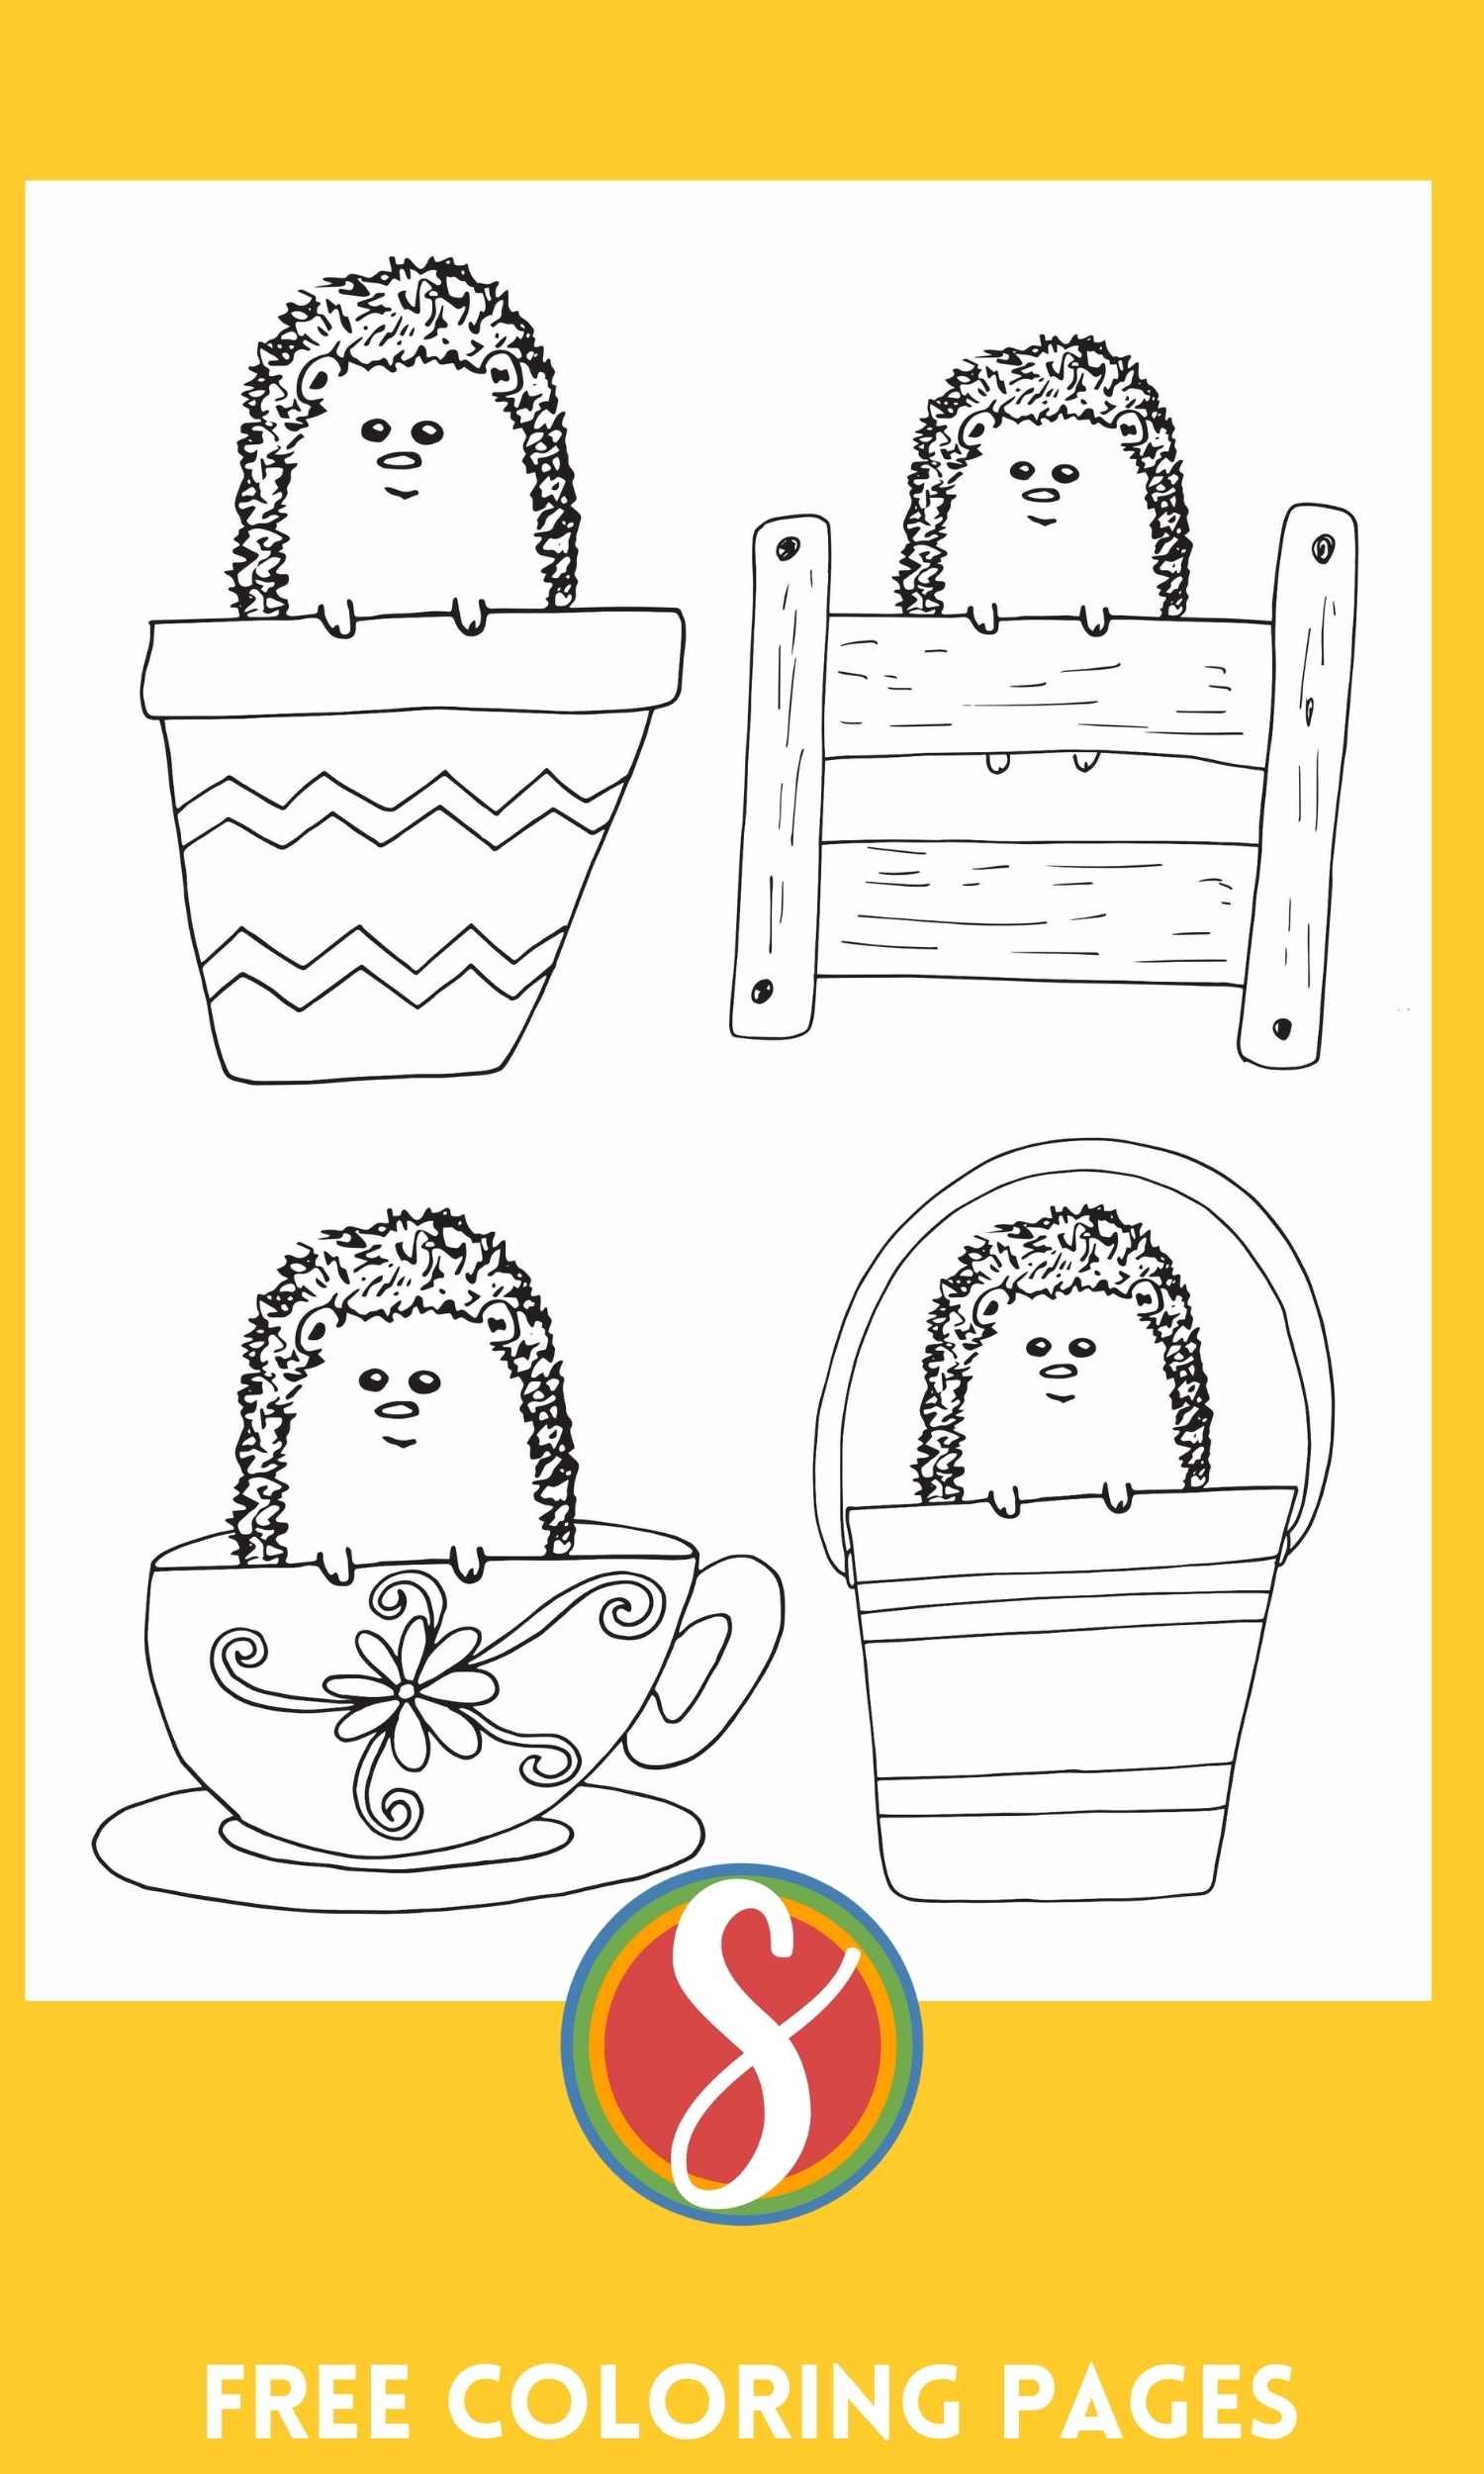 a hedgehog coloring page with 4 hedgehogs hiding behind a fence, in a bucket, in a planter, and in a teacup